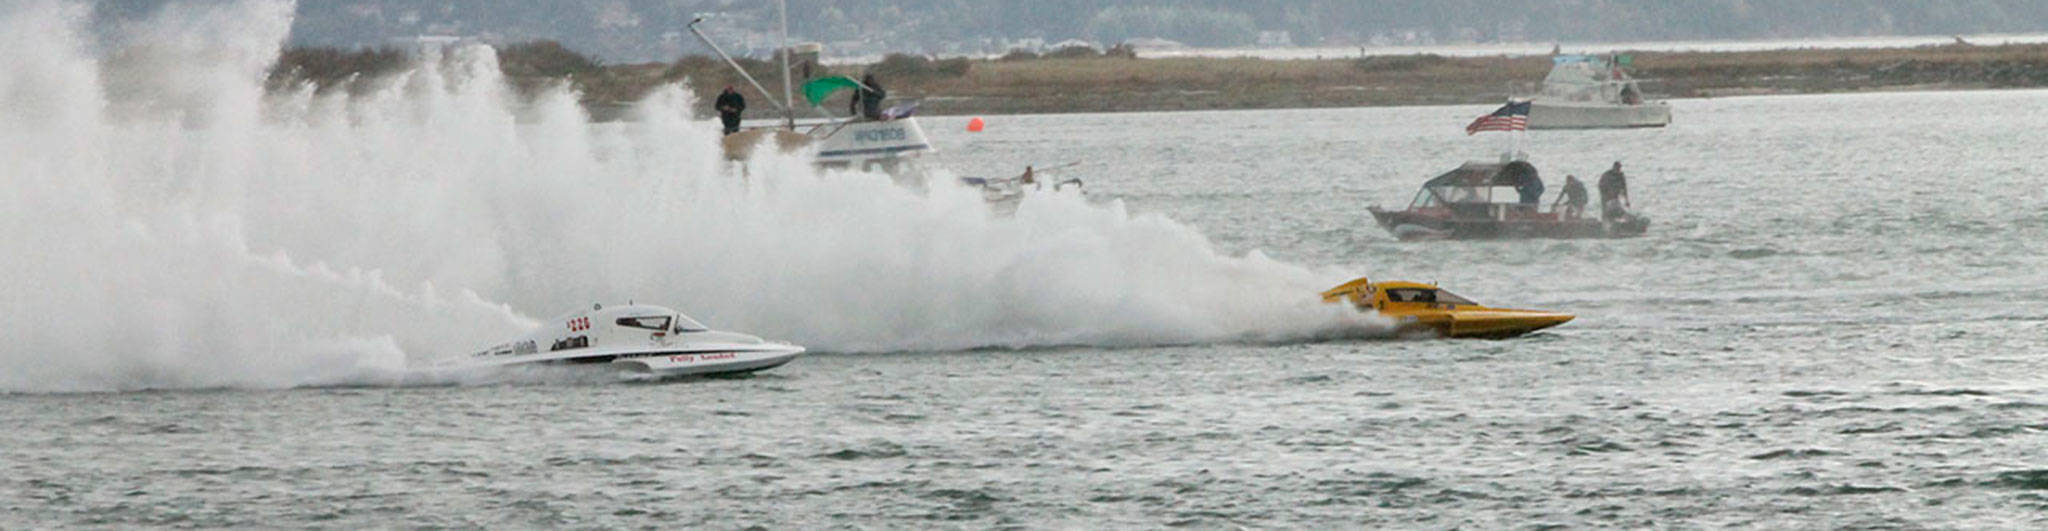 Boats zip along the Oak Harbor course during last year’s Hydros for Heroes. (Photo by Jim Waller/Whidbey News-Times)